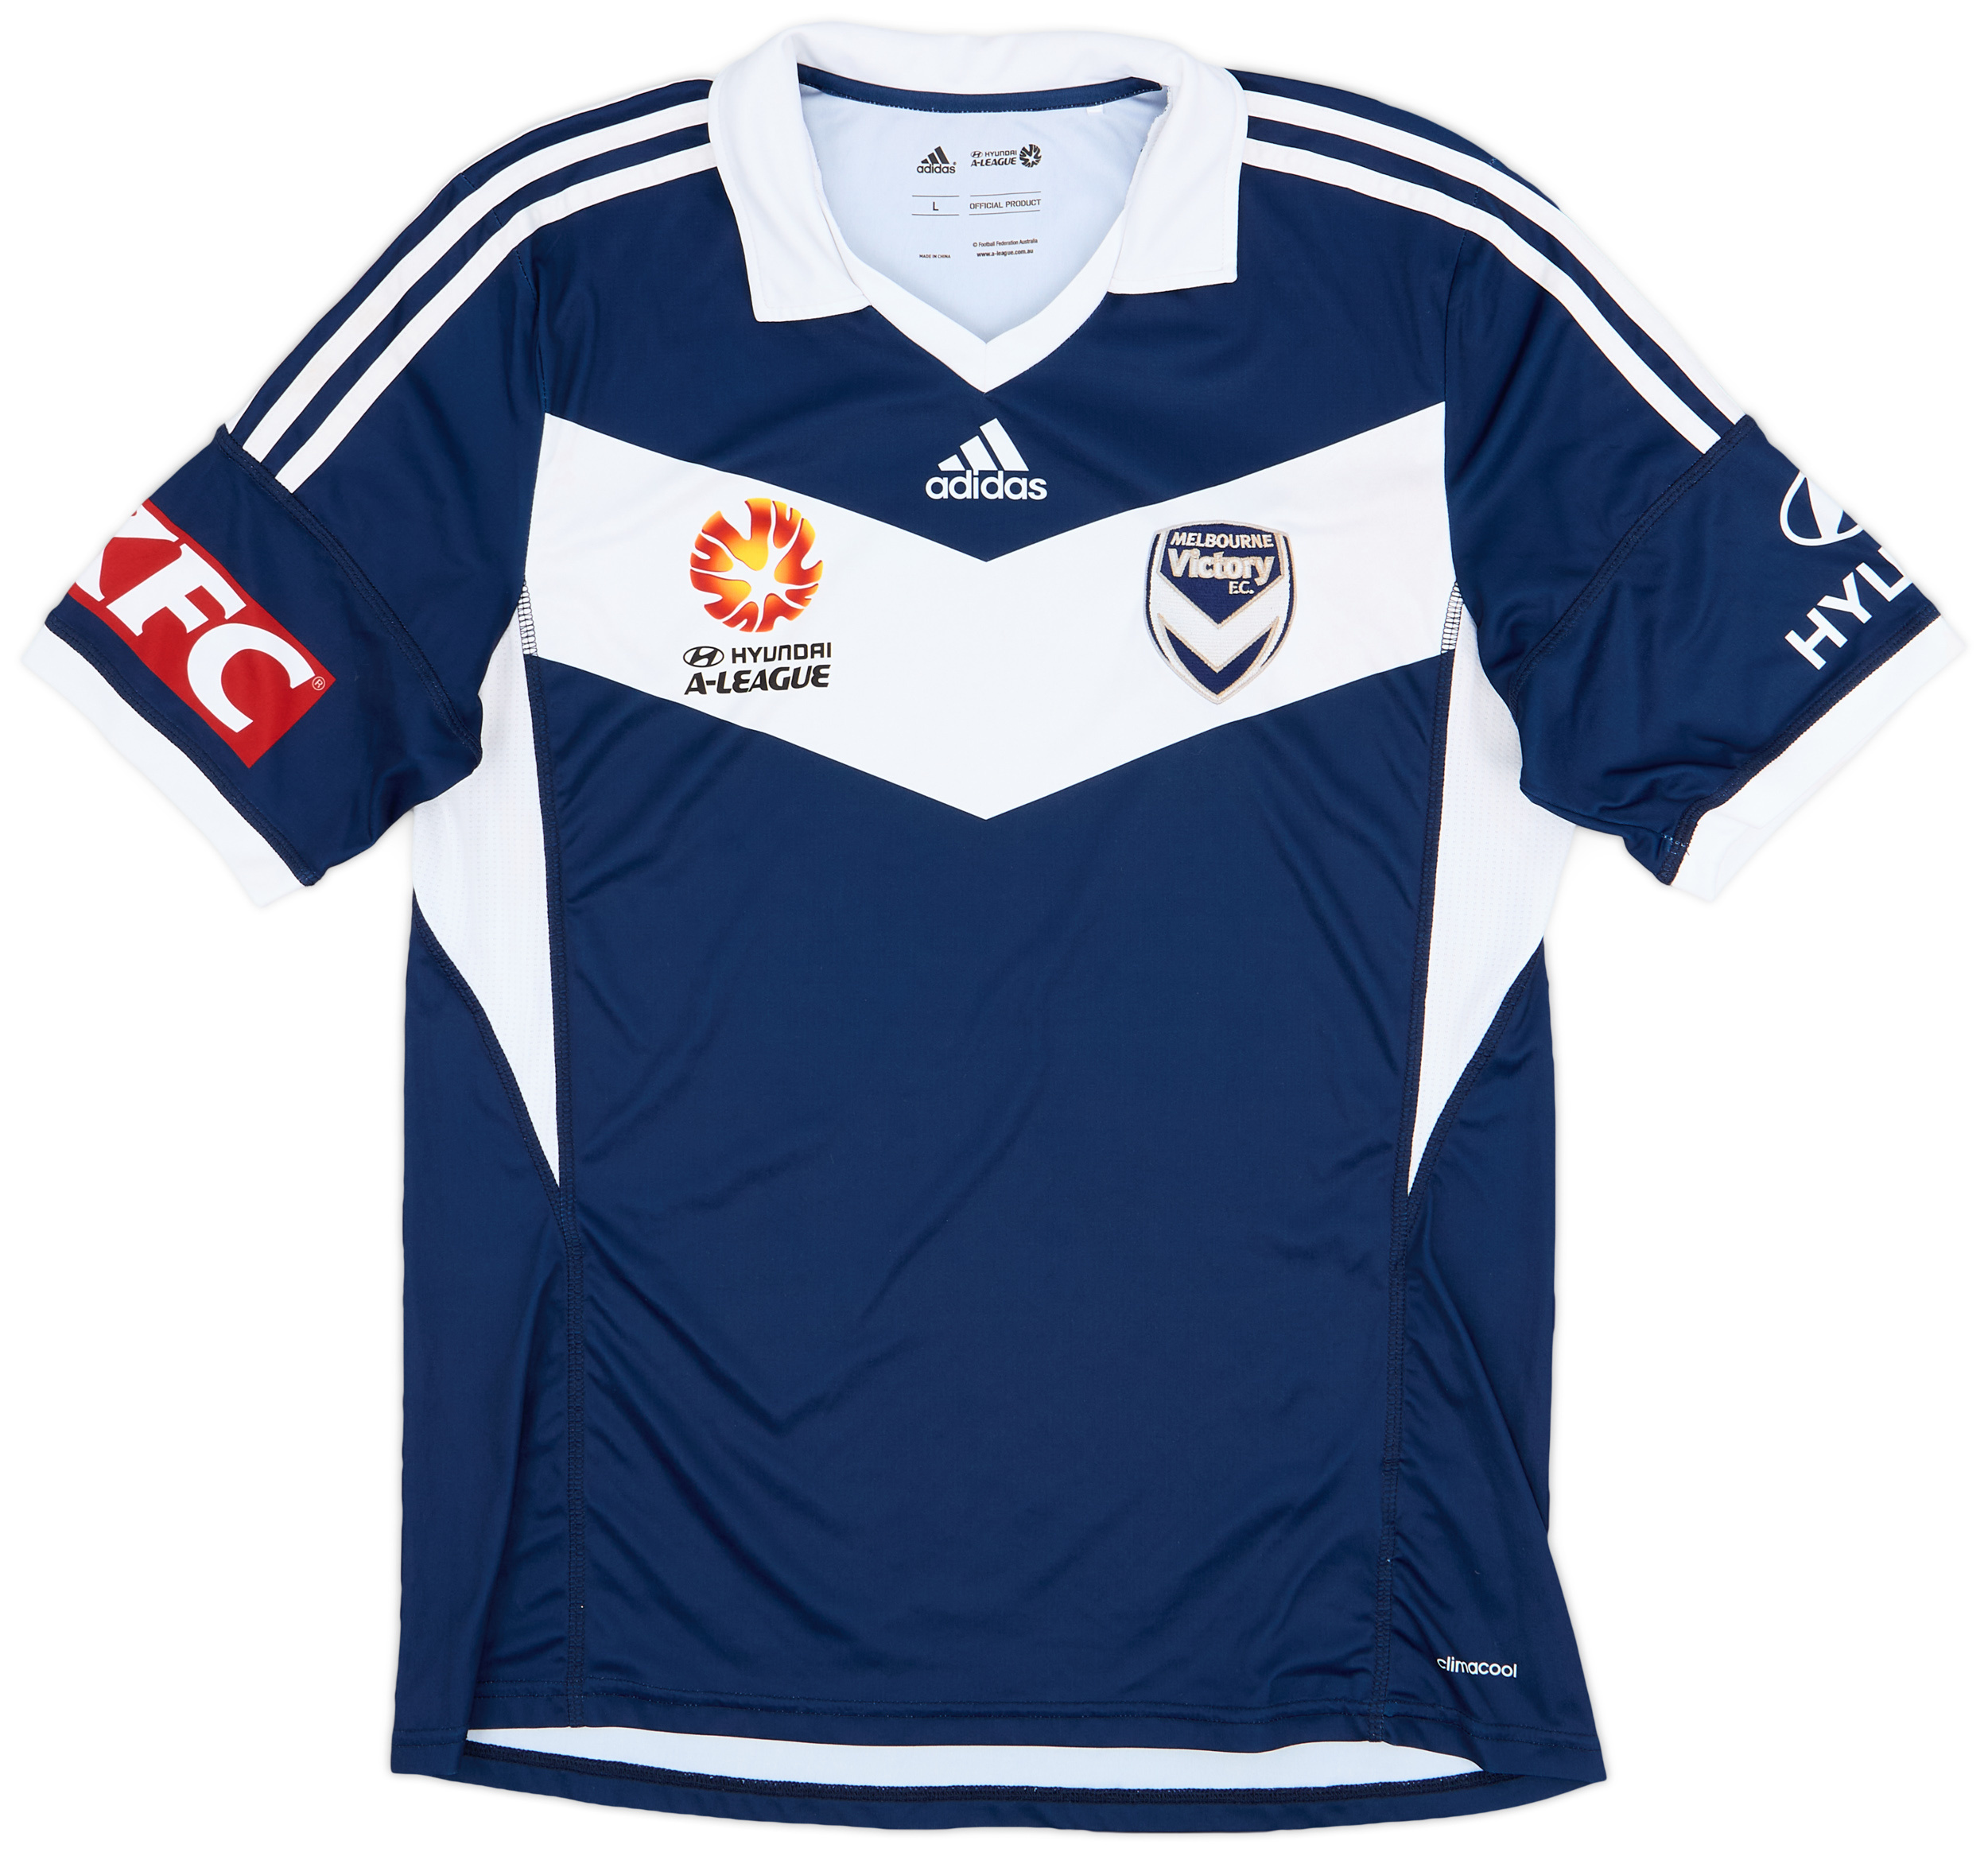 2014-15 Melbourne Victory Home Shirt - 9/10 - ()